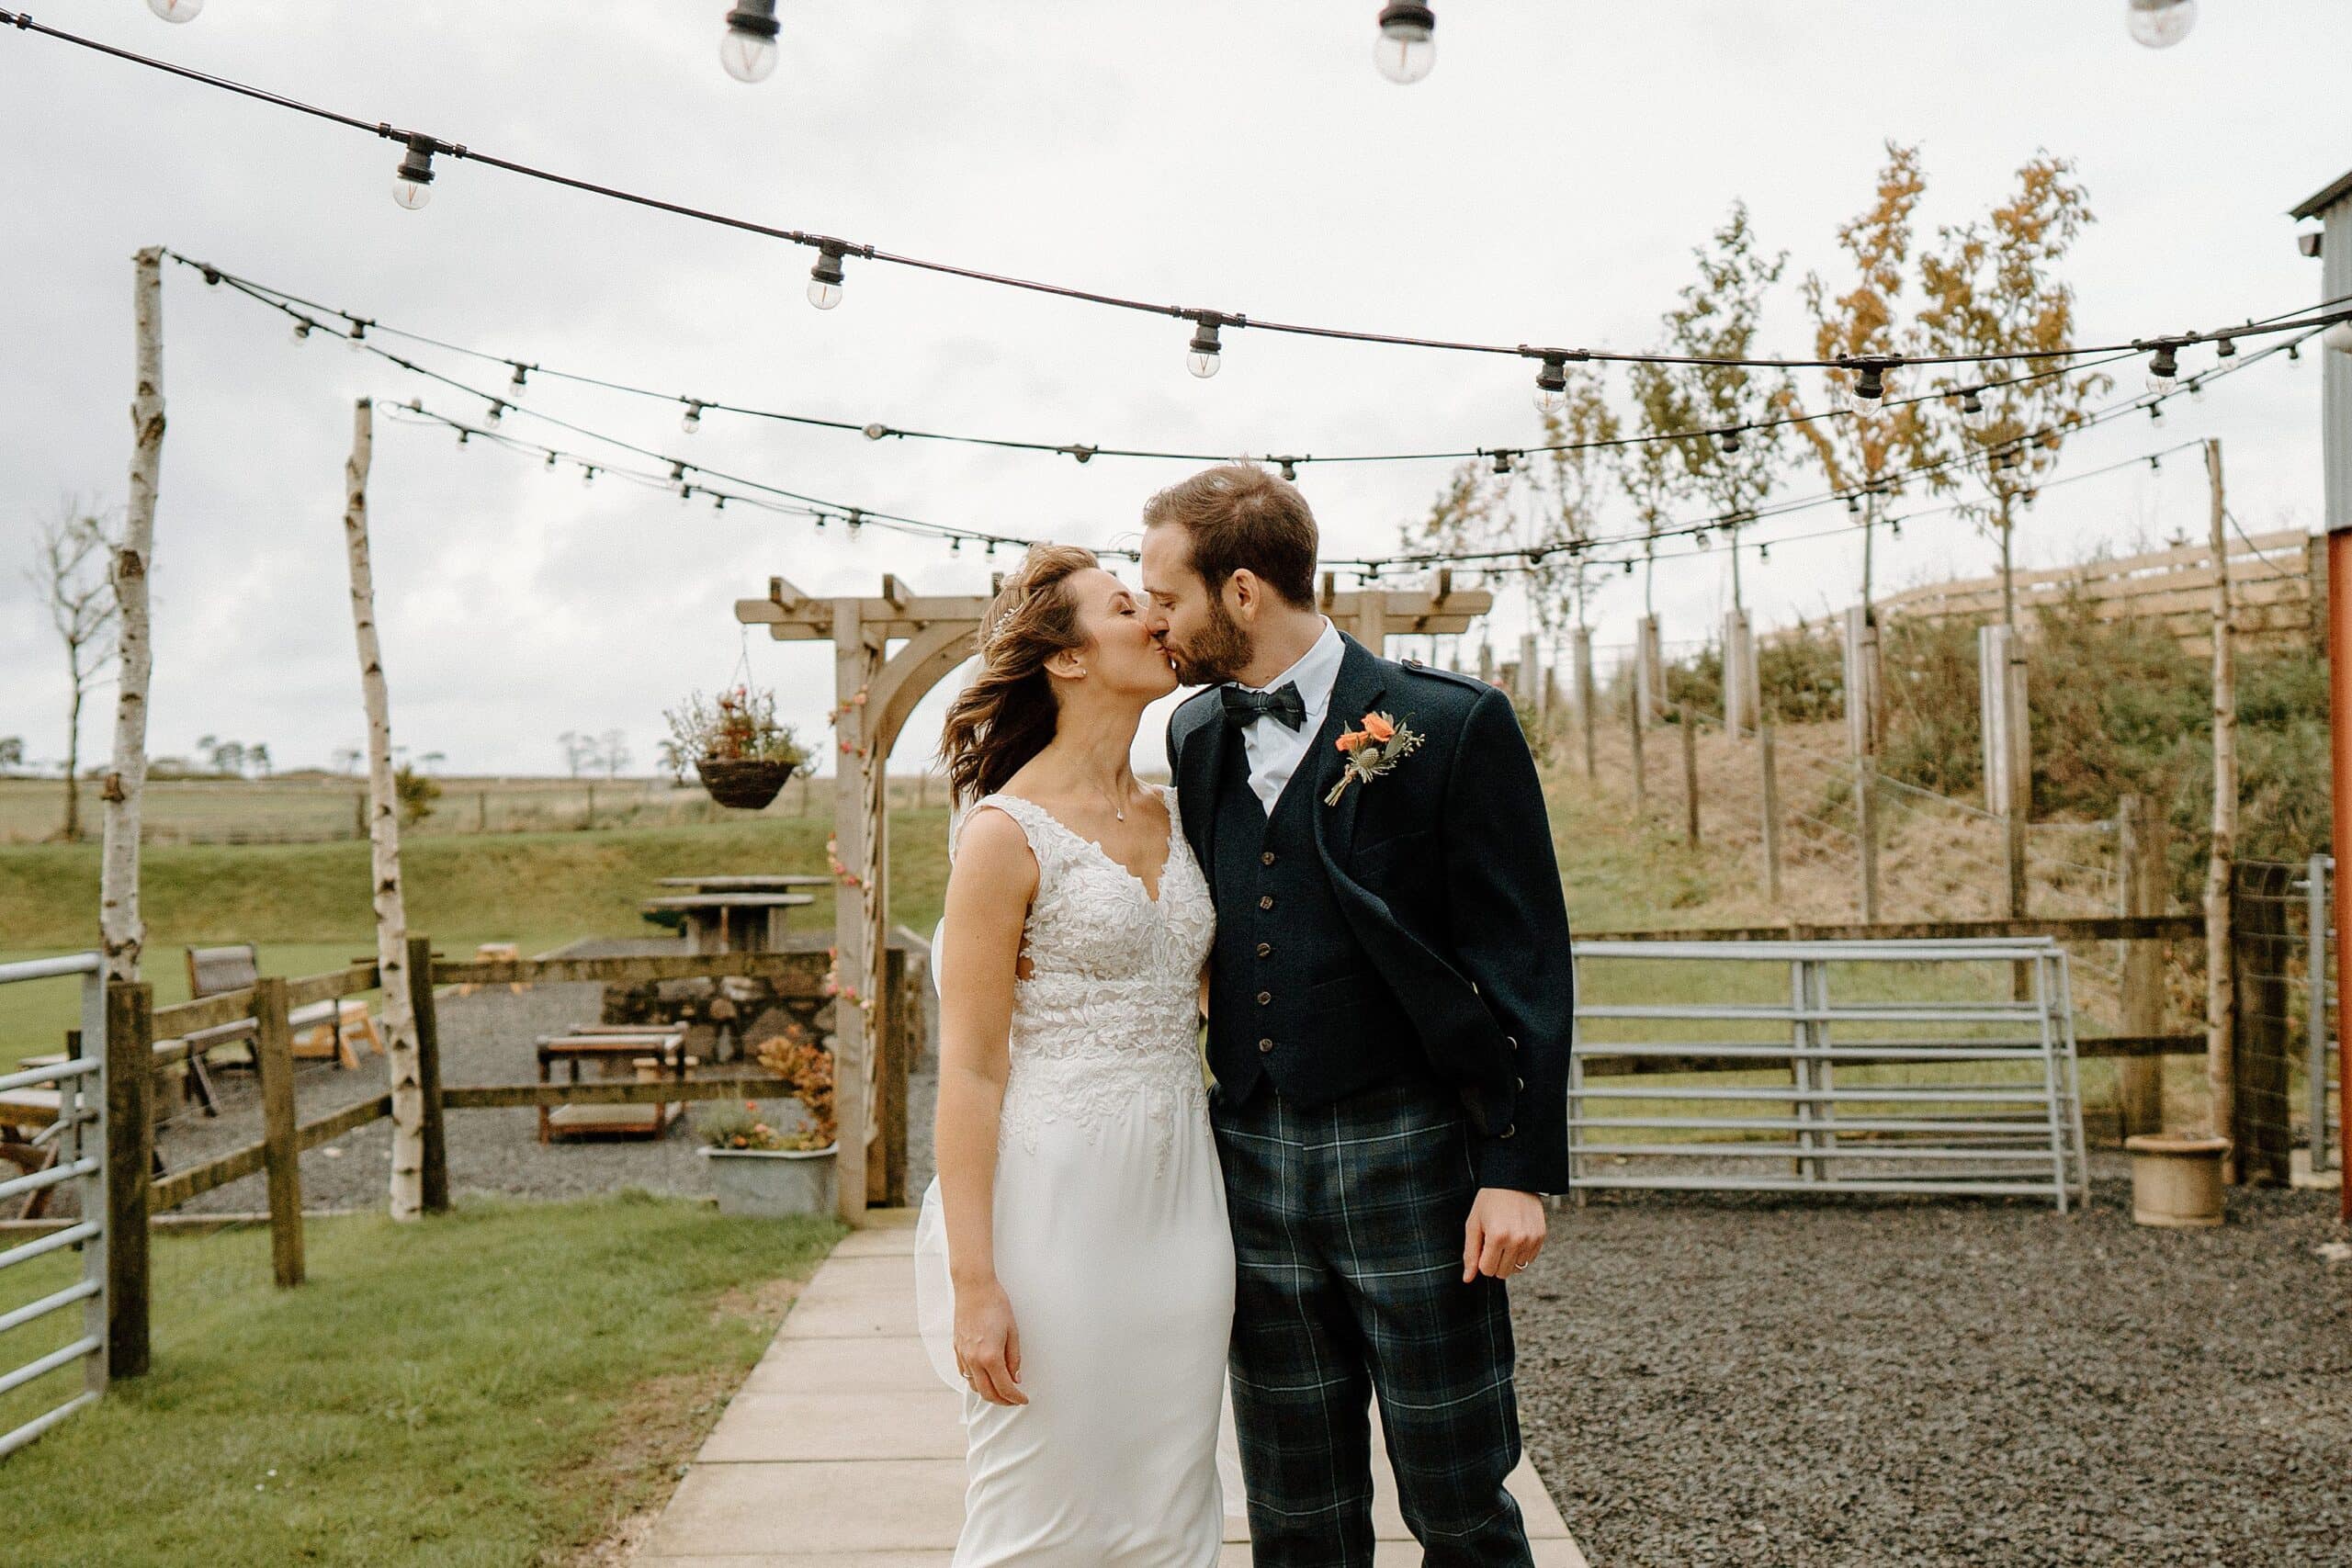 outside exterior view of harelaw farm wedding barn venue fenwick scotland showing bride and groom kissing in front of wooden arch and beneath festoon lights